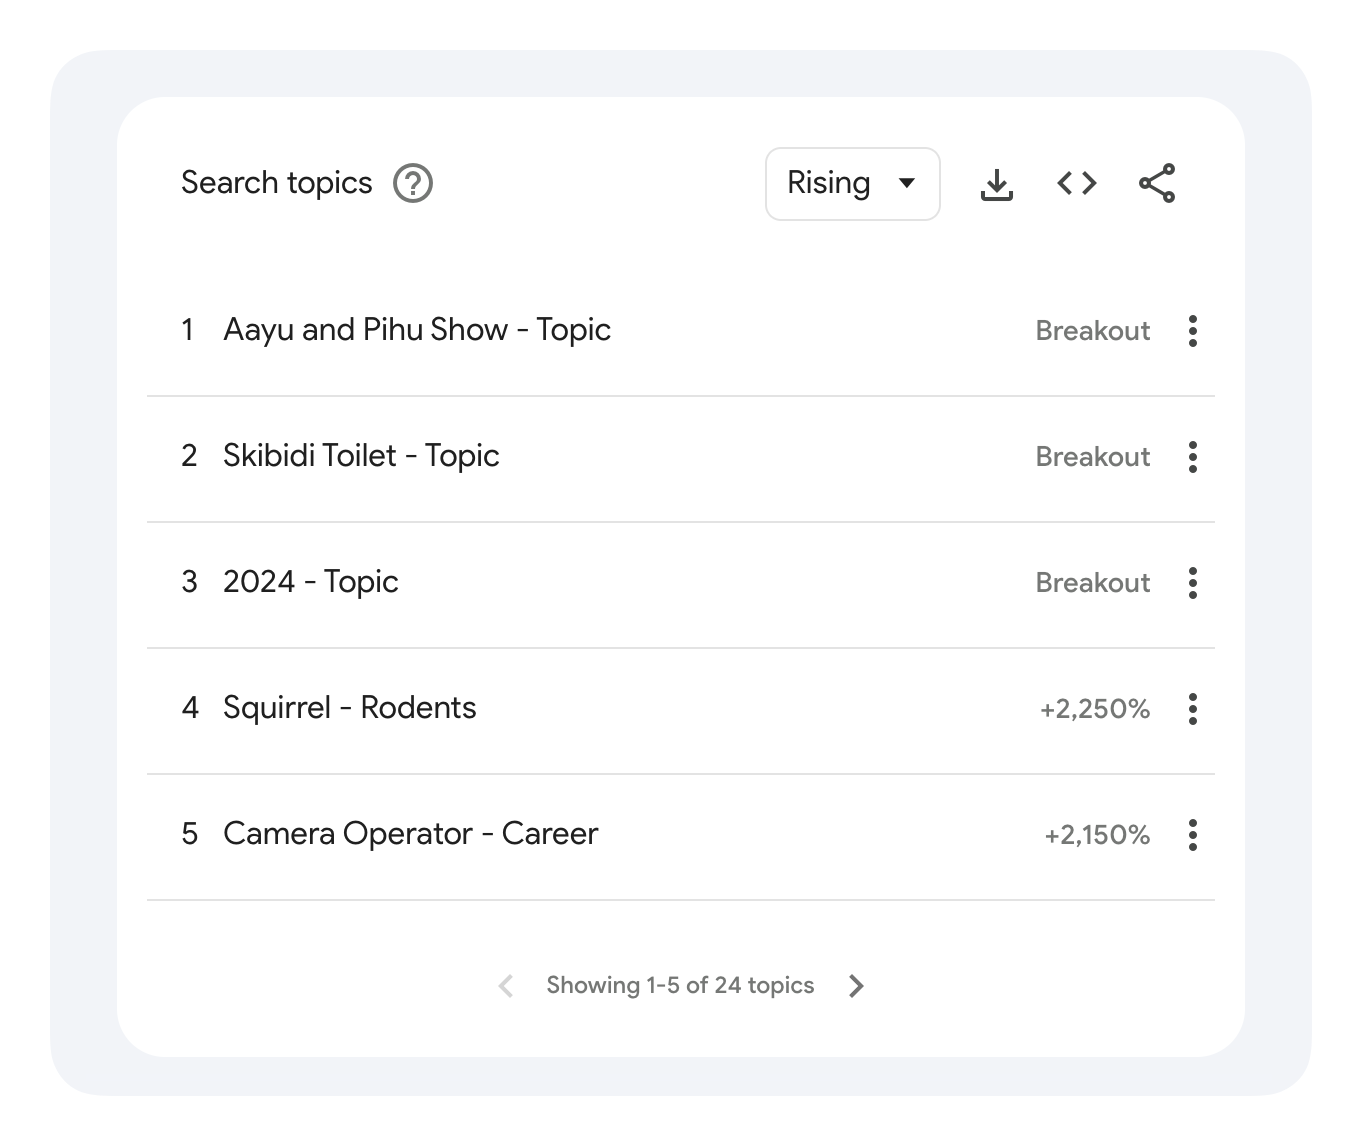 Related Topics - Top Search Topics Overall